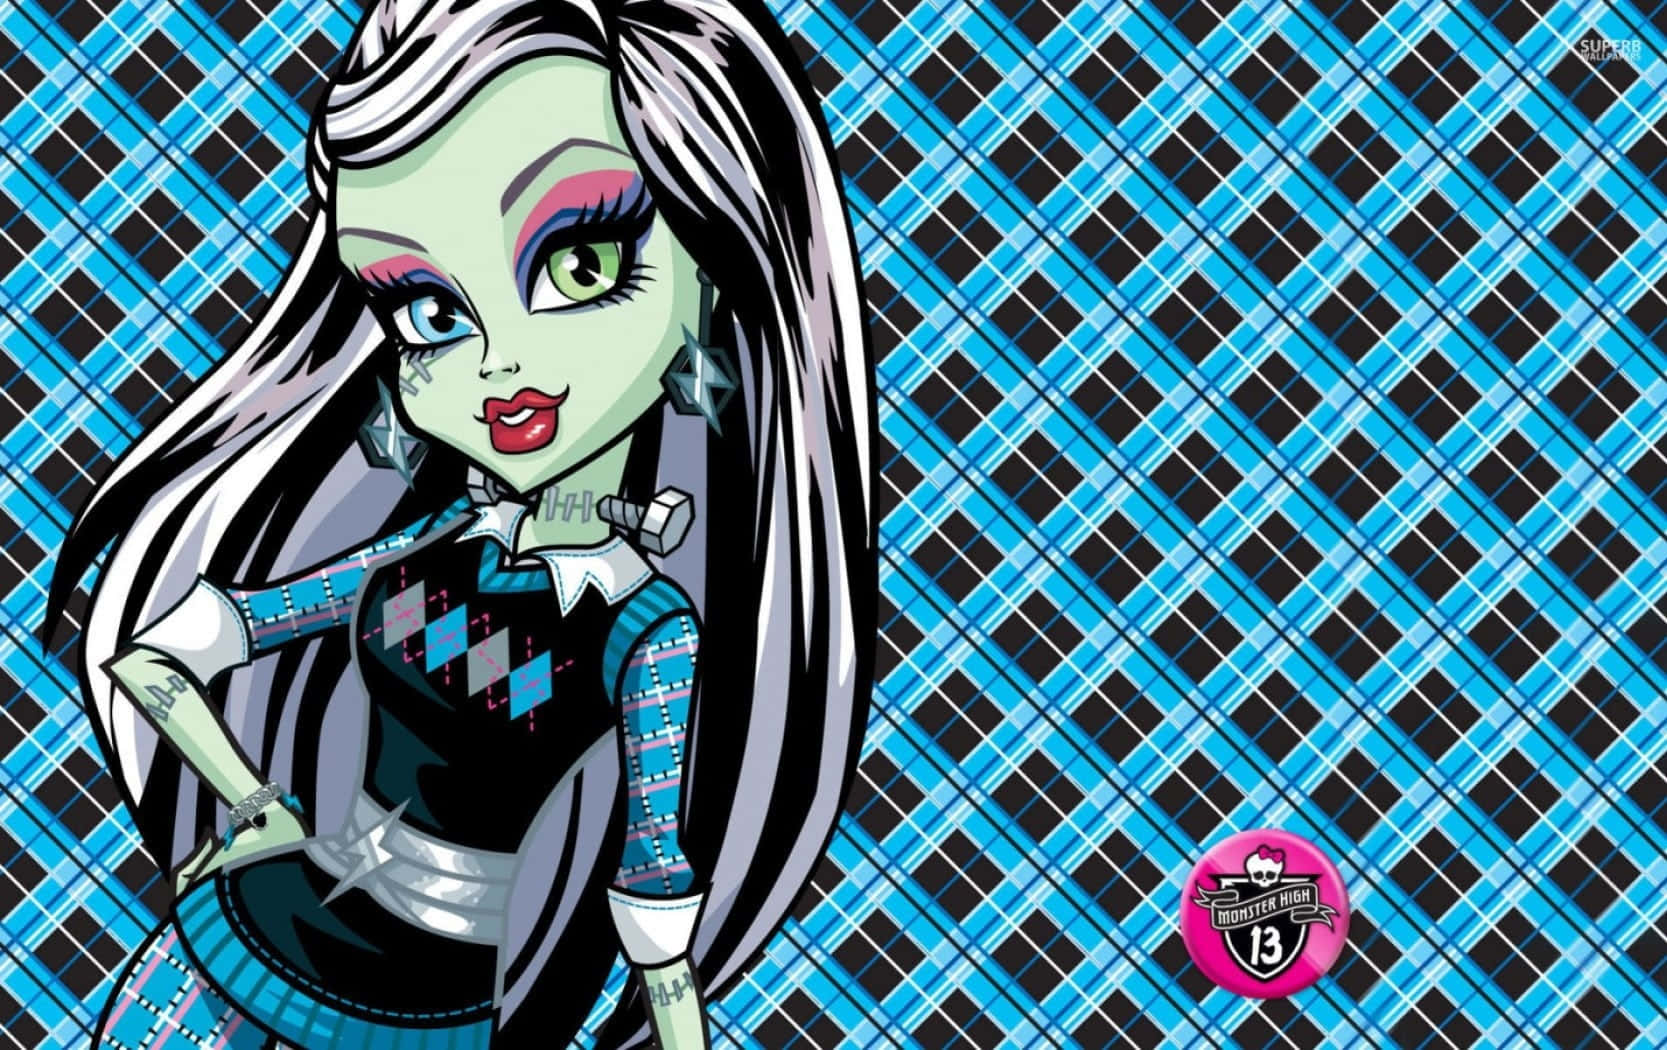 Join The Monster Fun With The Fabulous Monster High Crew! Wallpaper